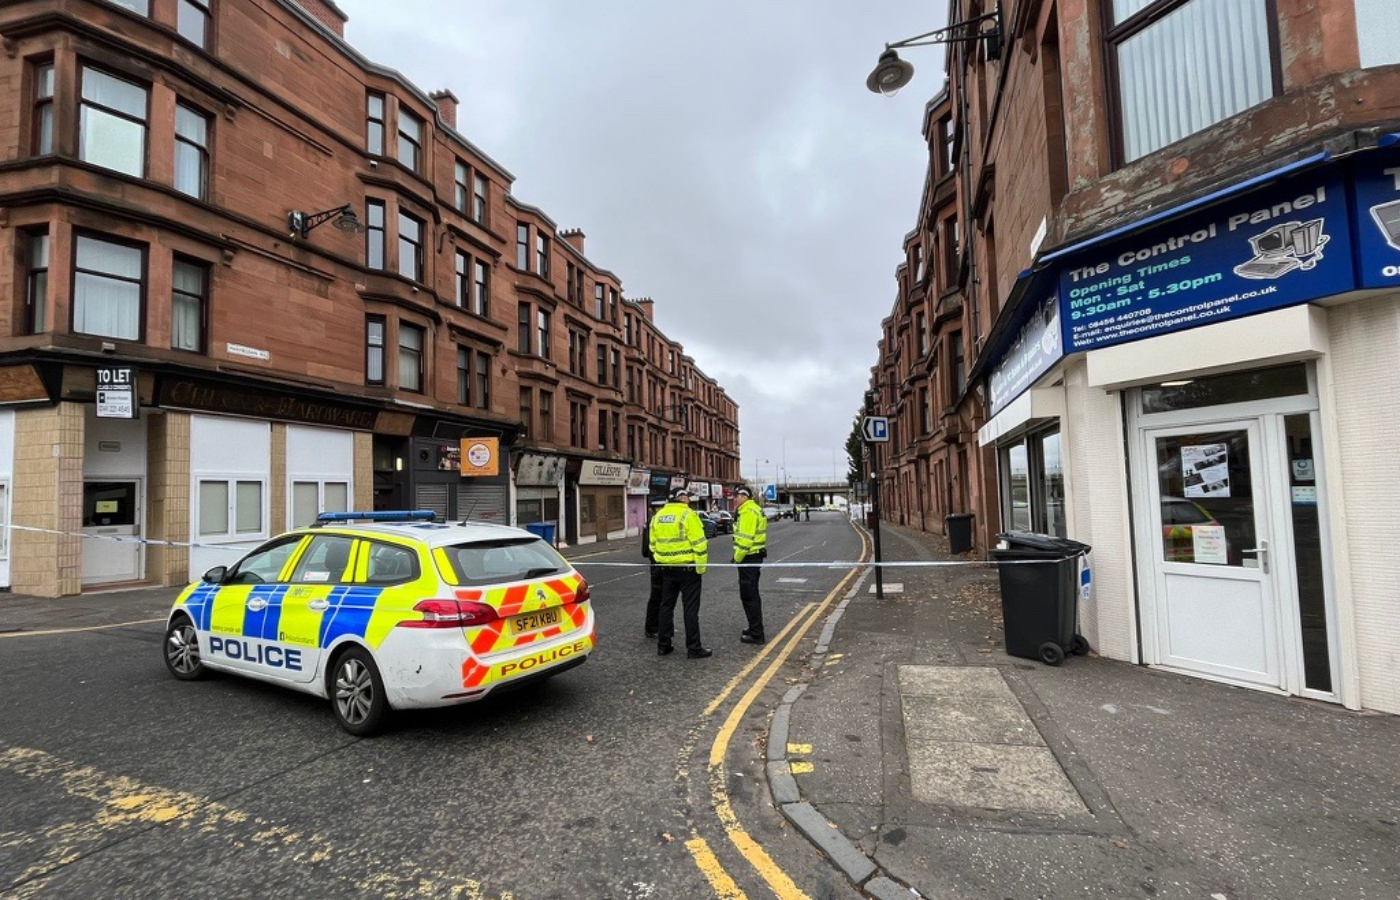 The incident took place on Farmeloan Road, near the junction with Victoria Street.